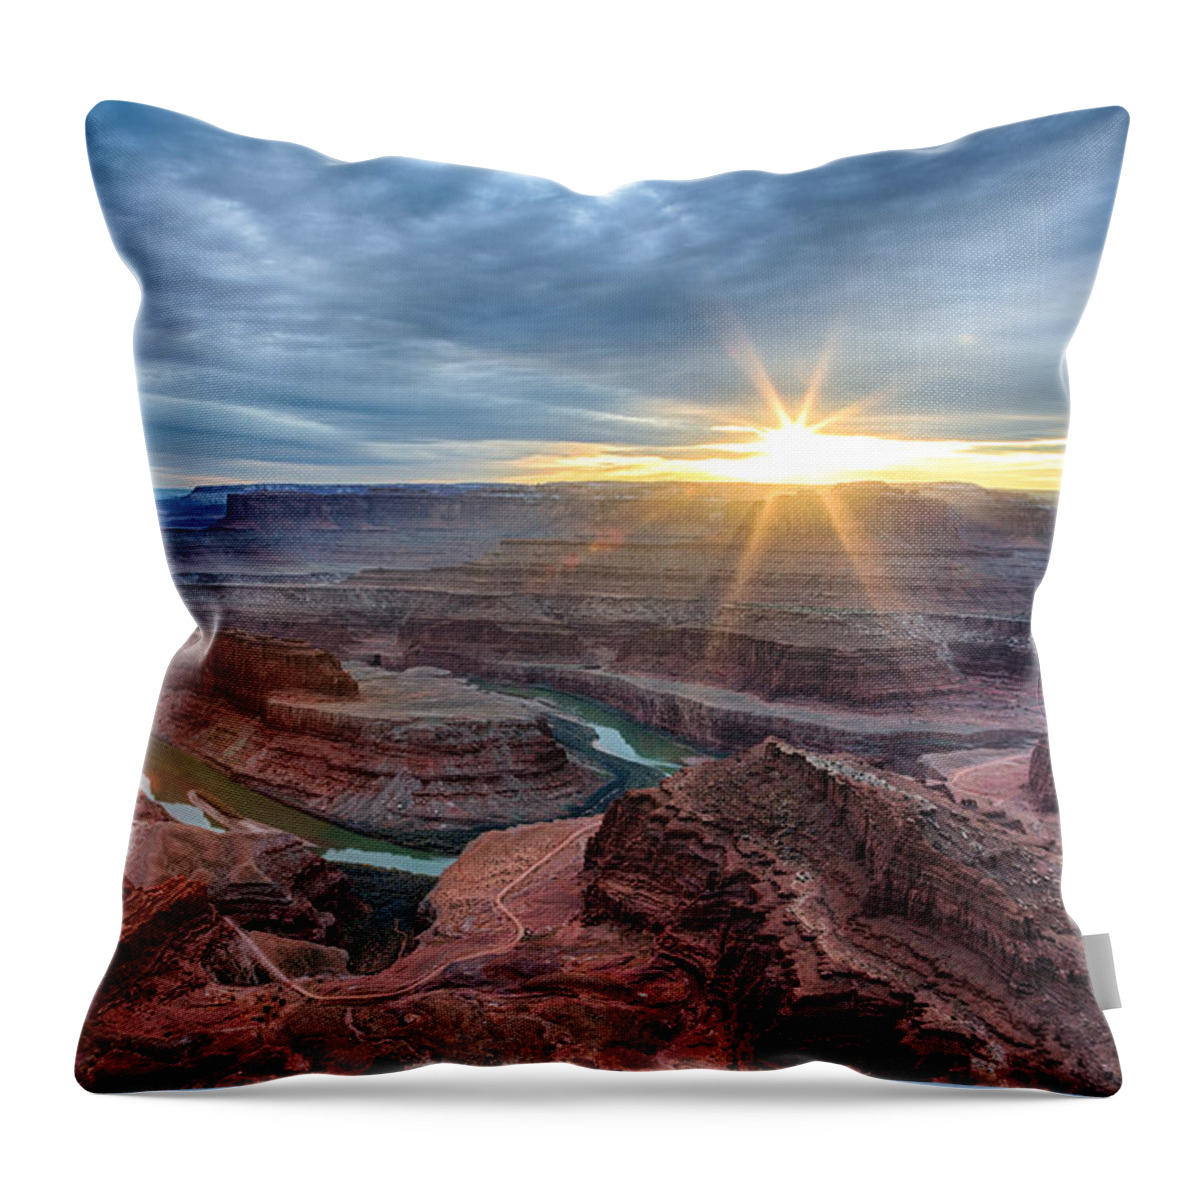 Utah Throw Pillow featuring the photograph Sunburst At Dead Horse Point by Denise Bush